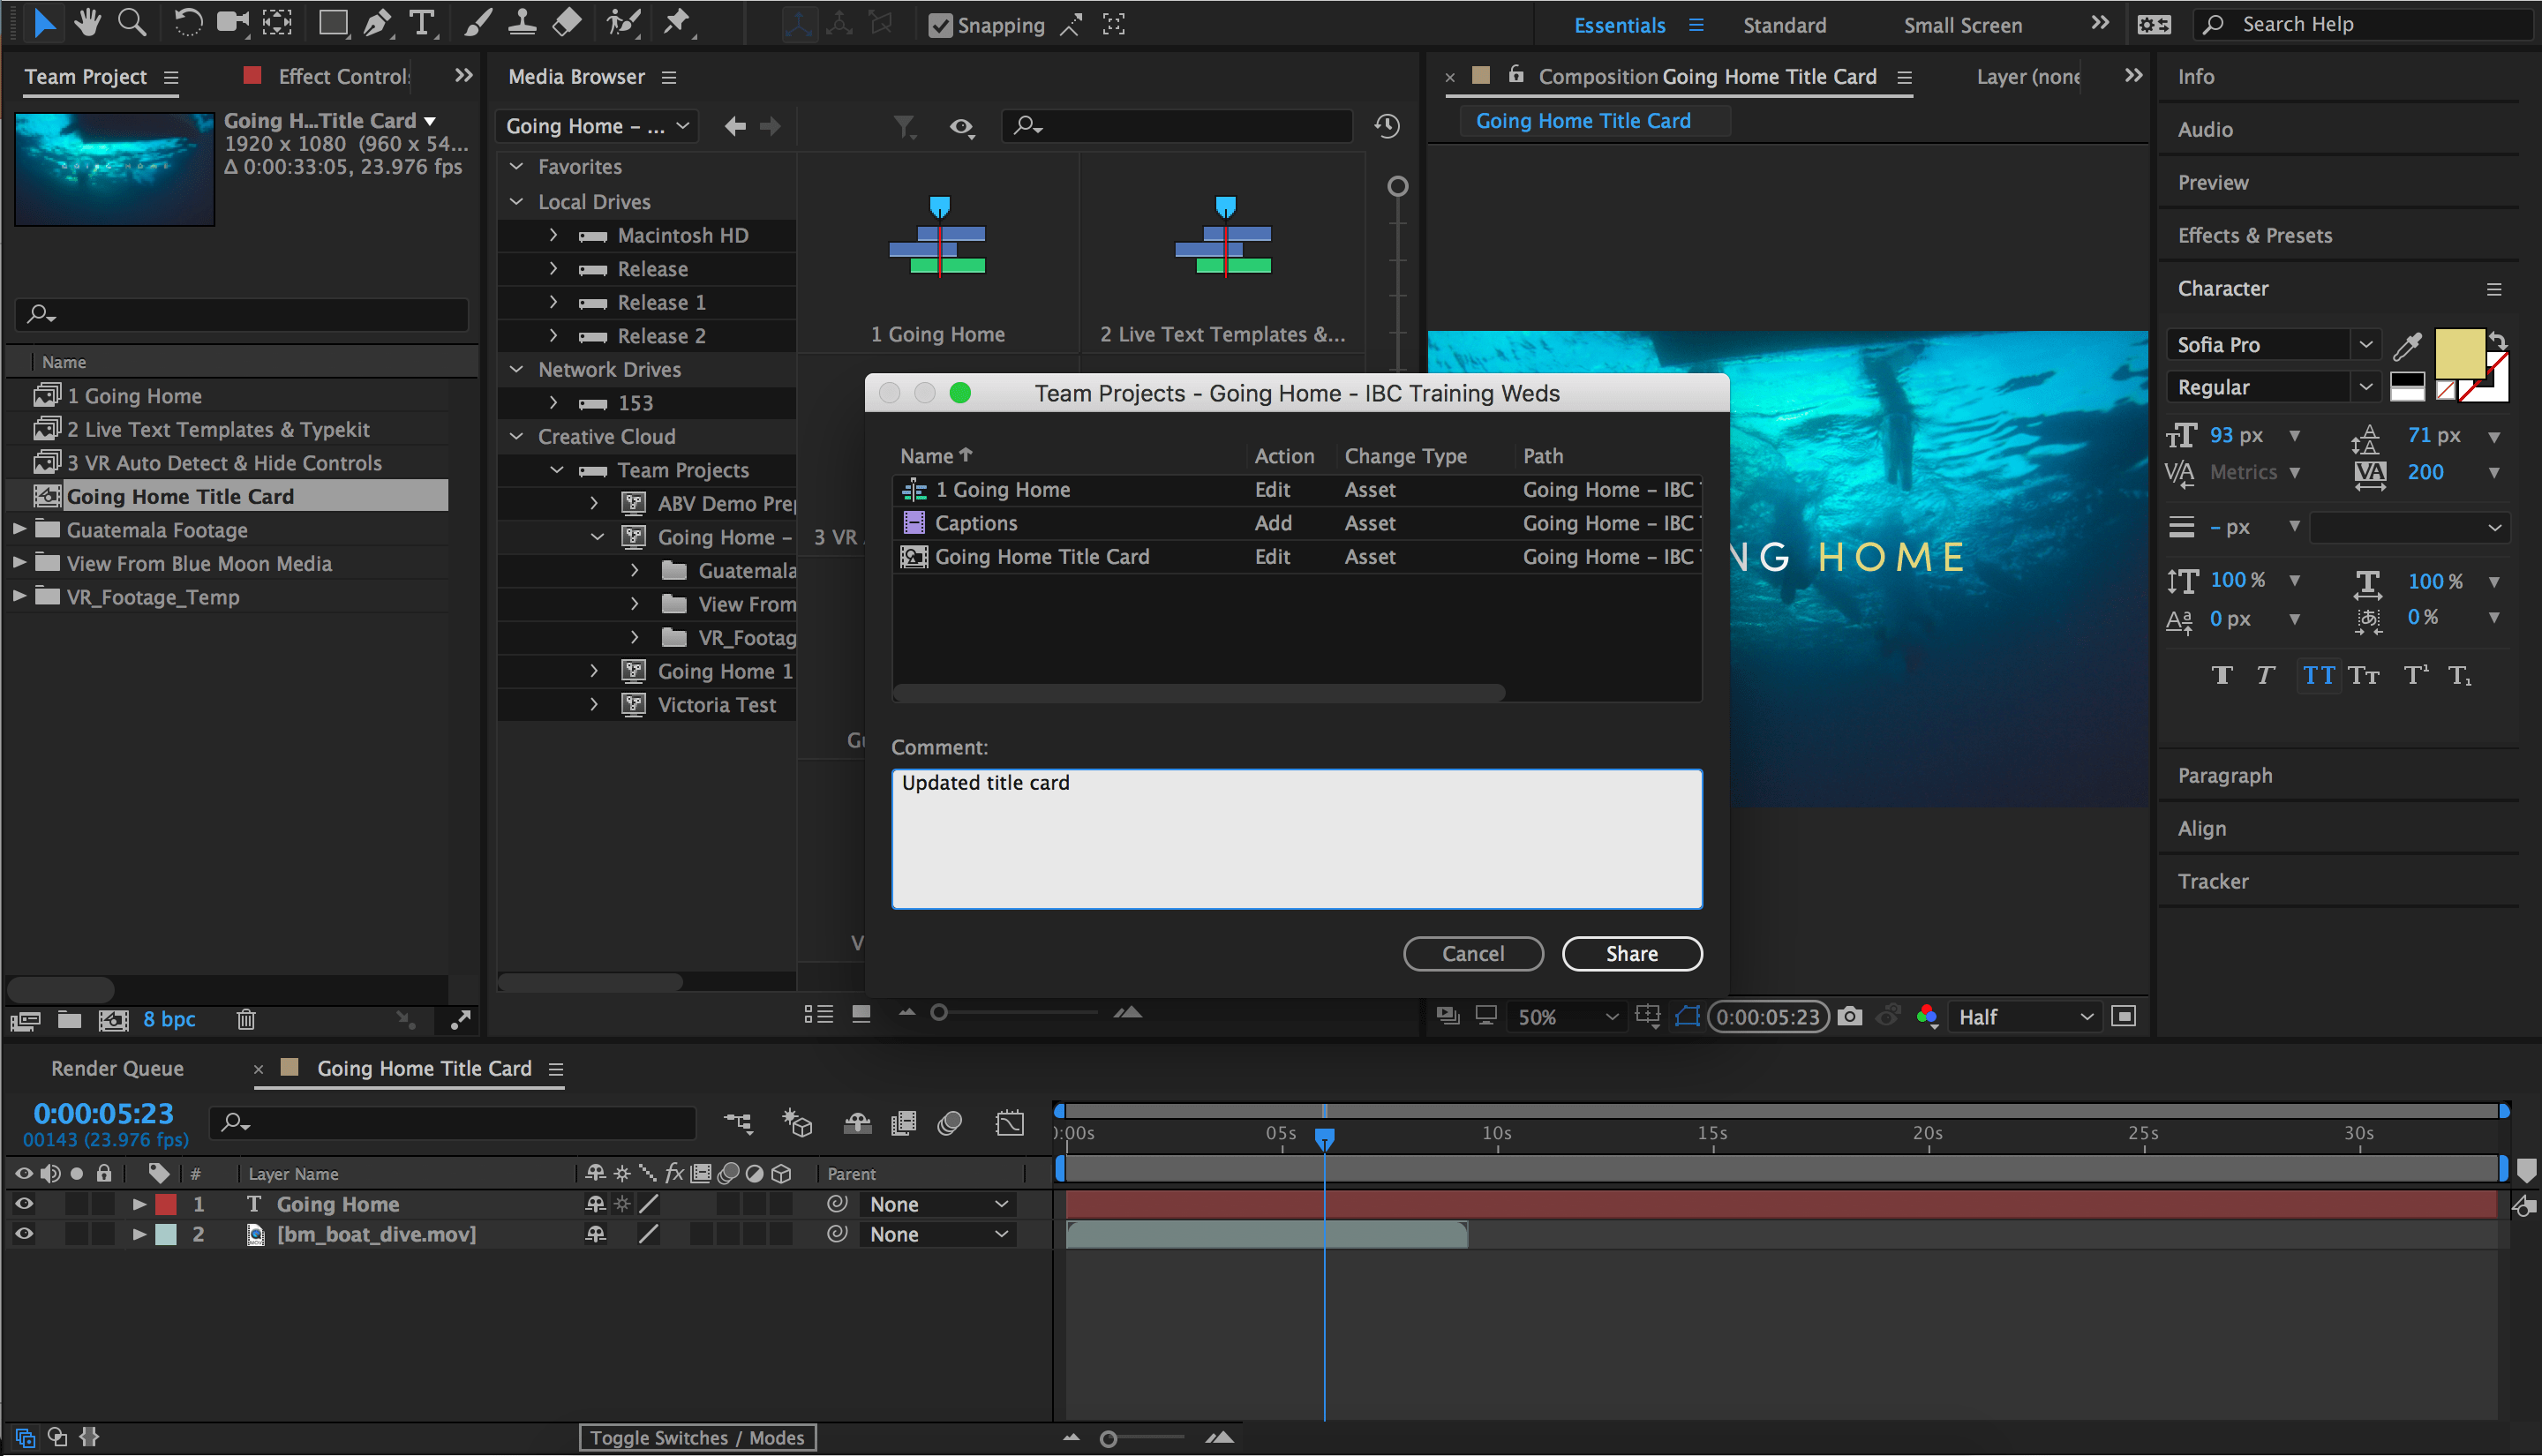 Effects preset. Adobe after Effects cc 2016. Adobe after Effects cc 2021. Project Control Premiere Pro. Adobe after Effects 2021 18.2.0.37\.